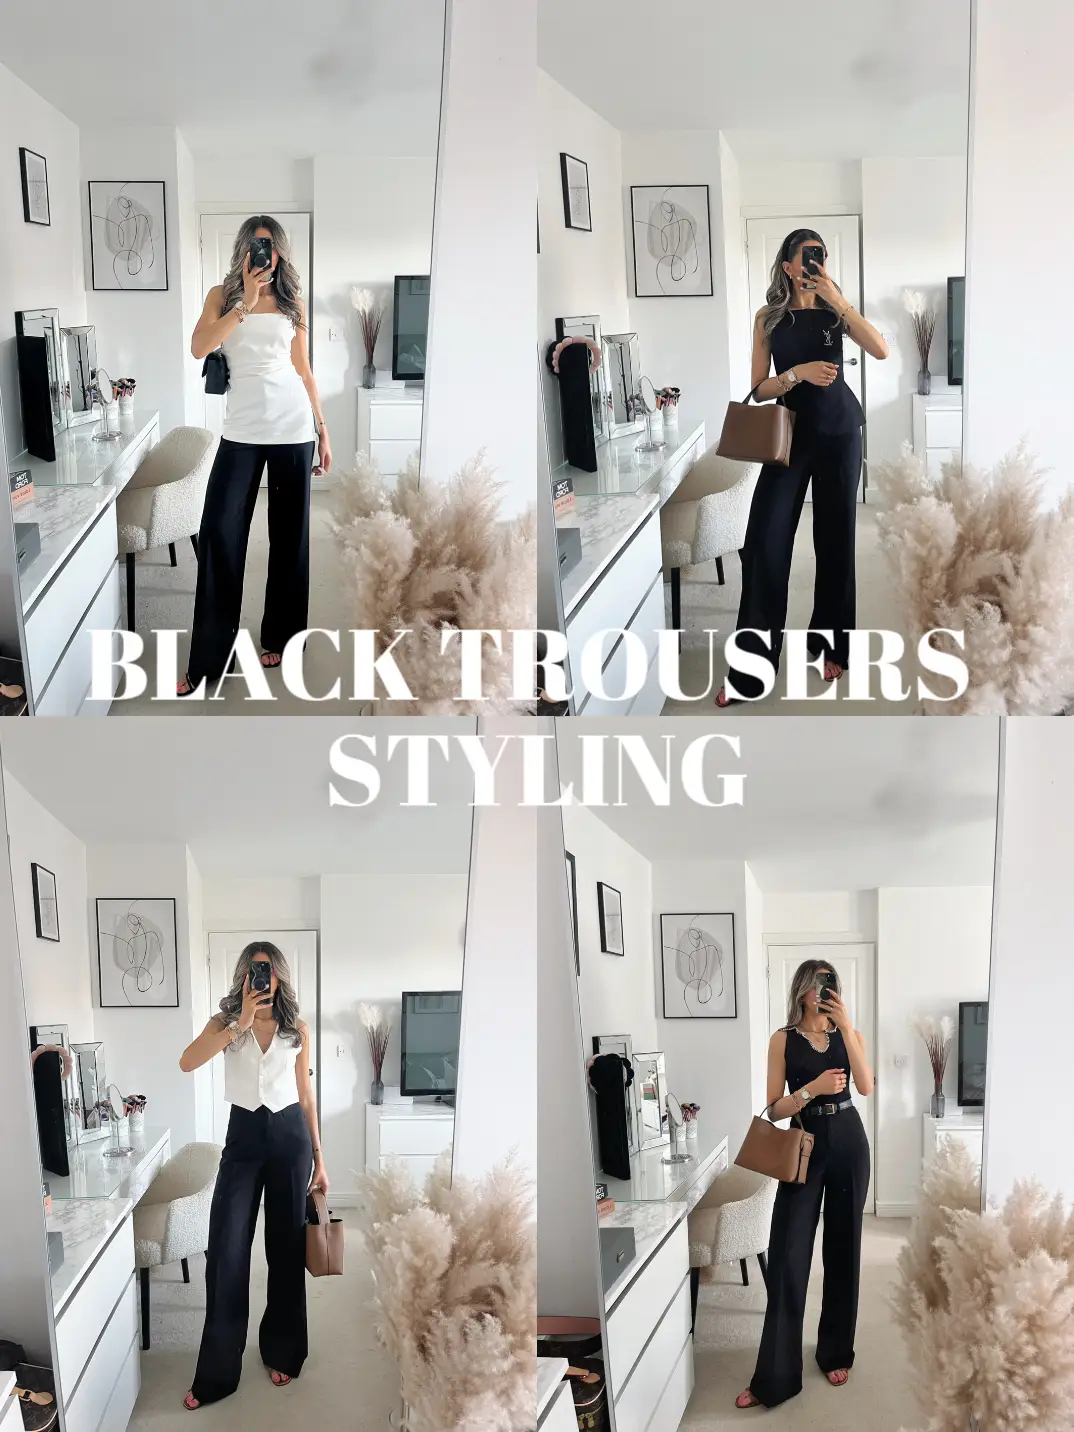 BLACK TROUSERS STYLING 🖤, Gallery posted by Emily Claire